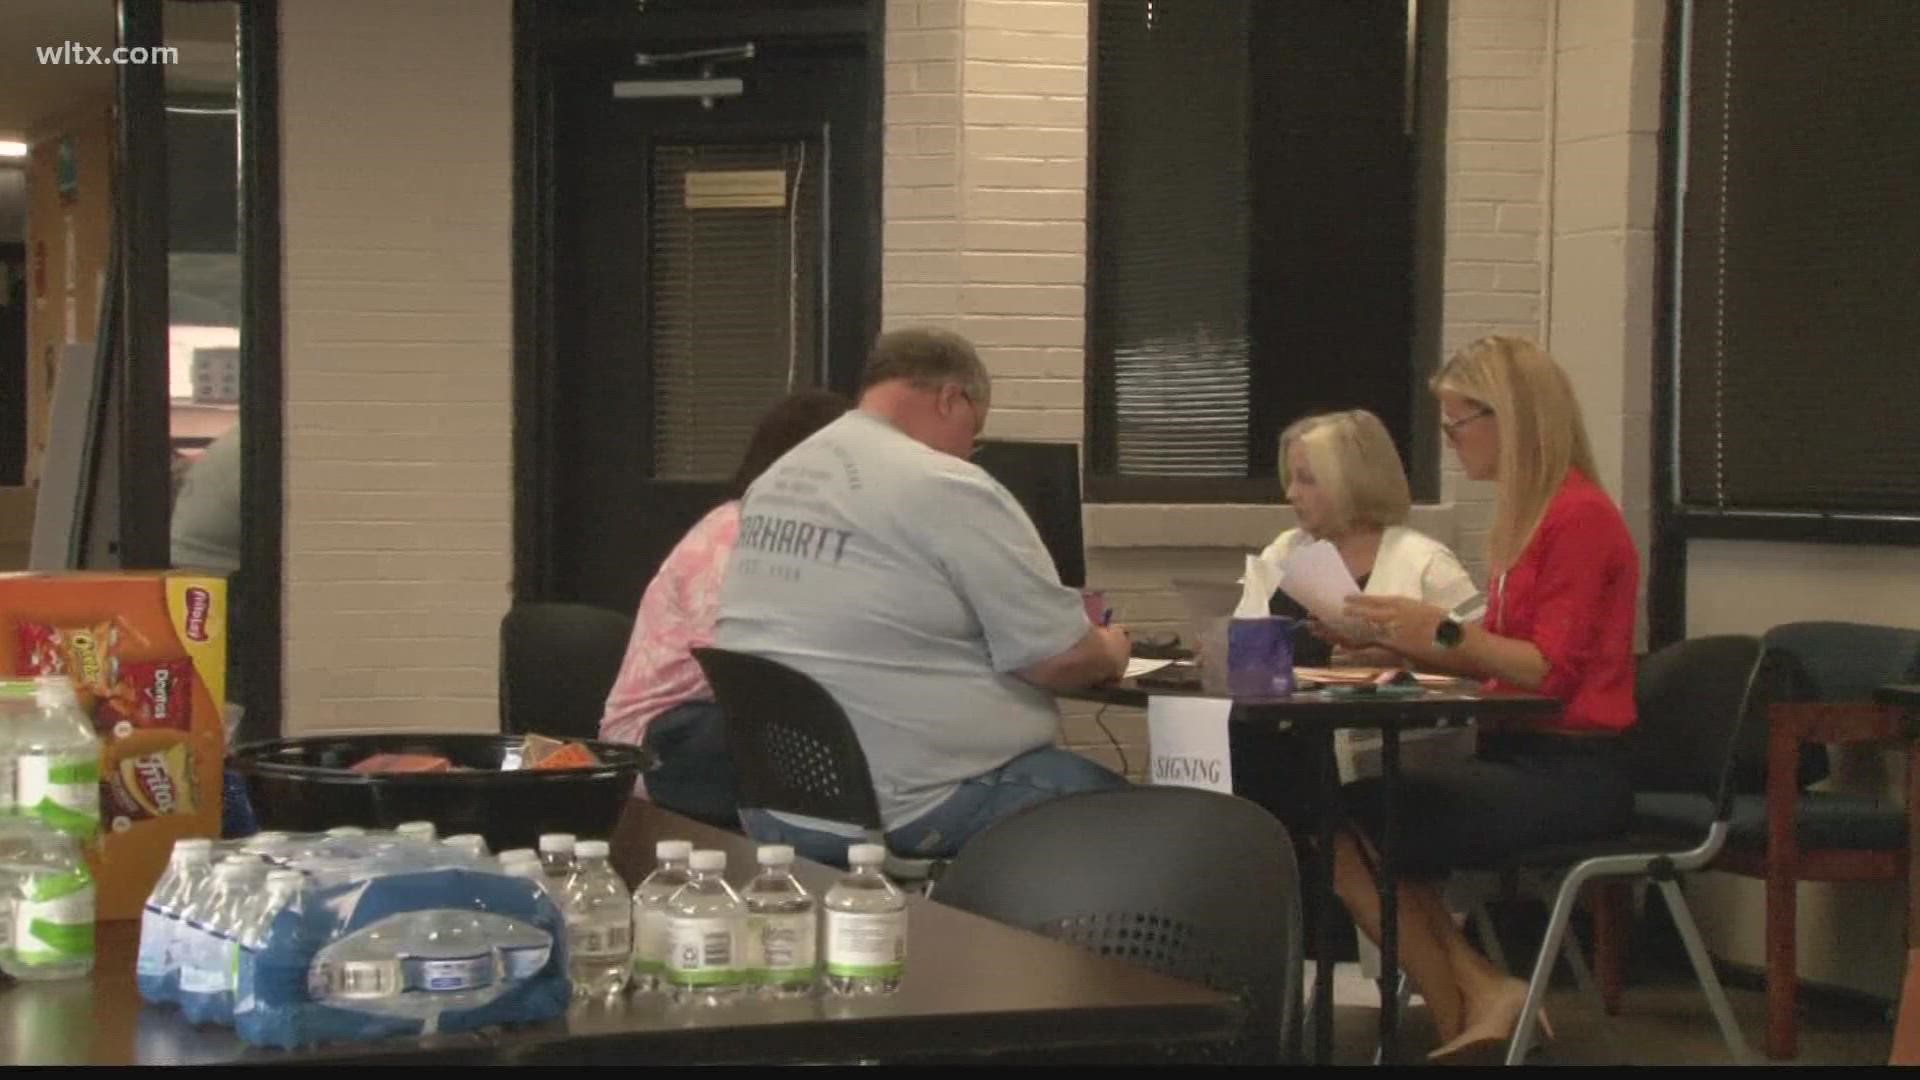 The Lexington Sheriff's Department was helped making wills for free thanks to a local business.